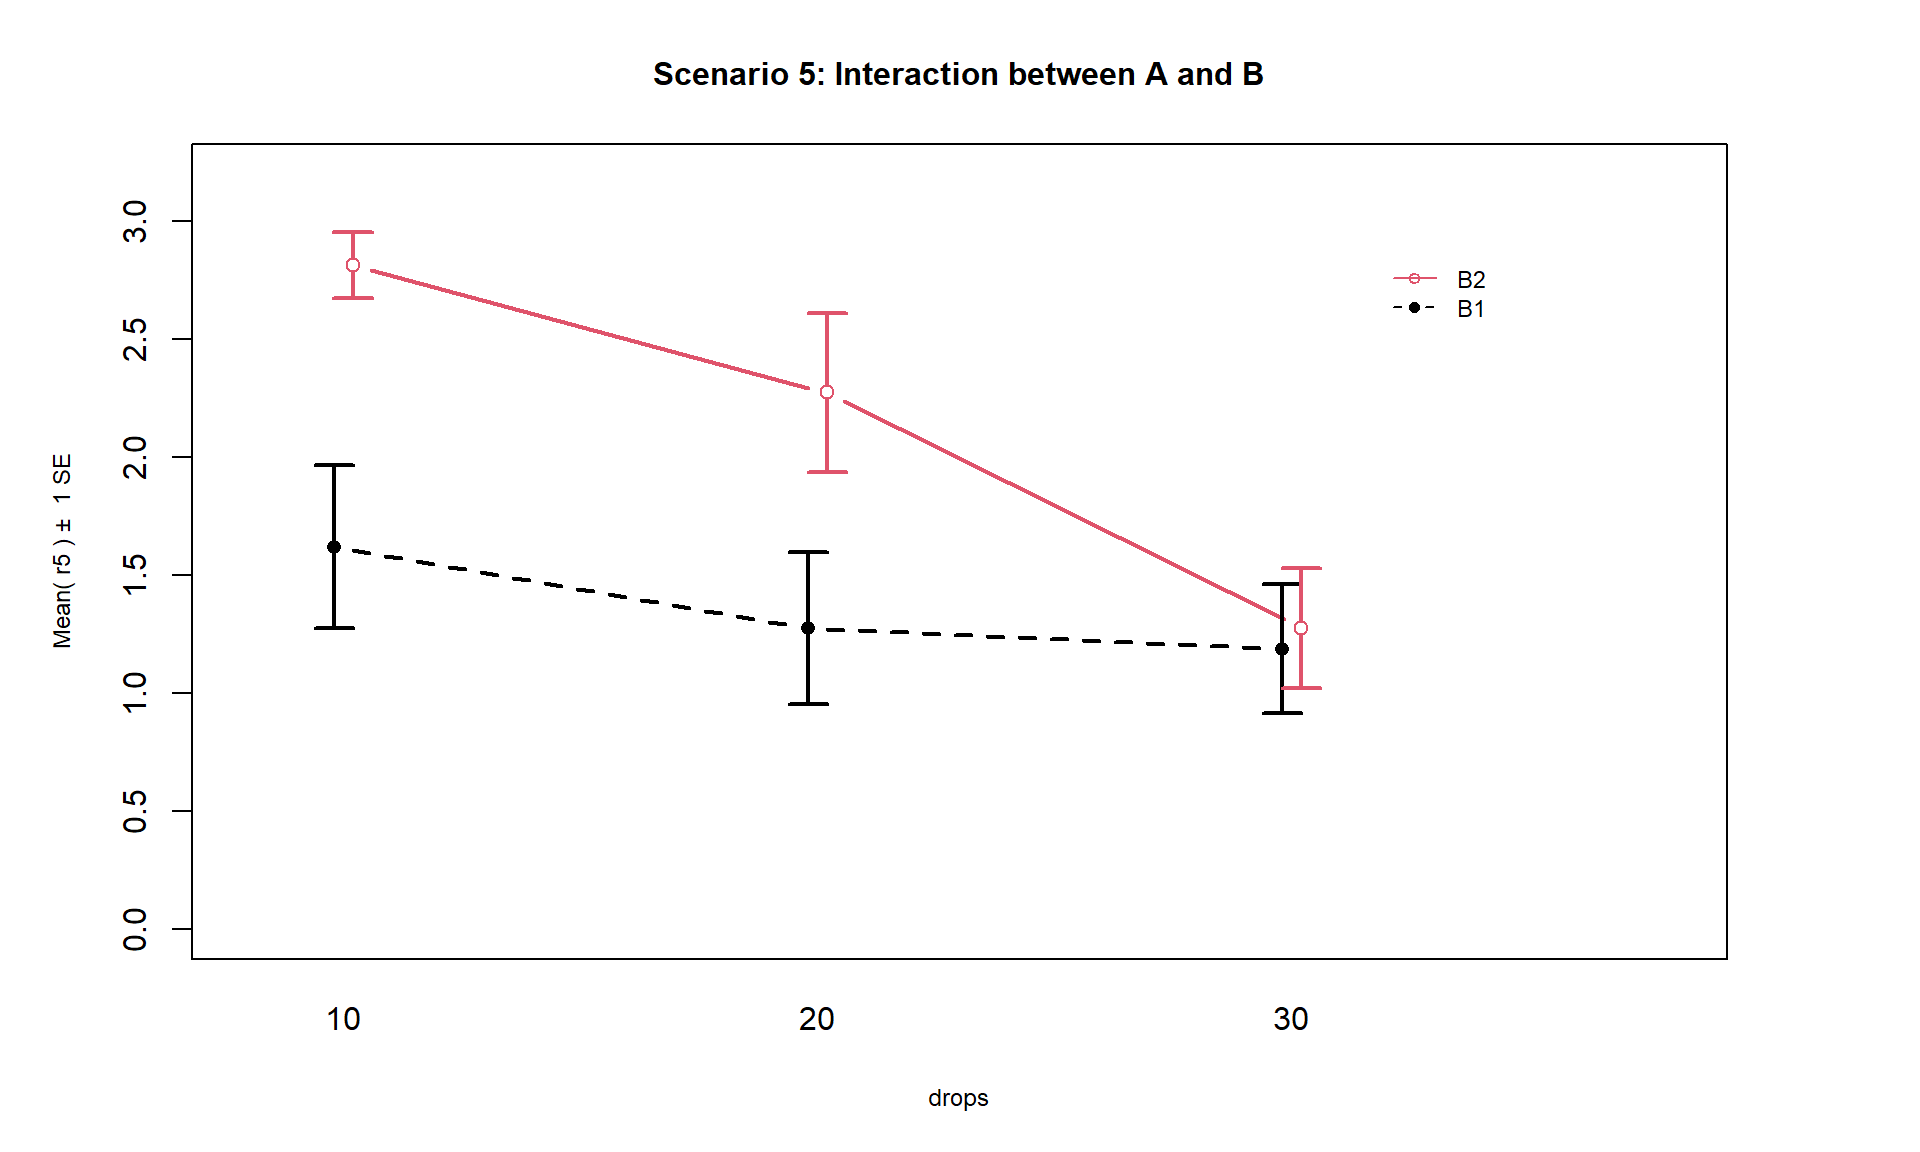 Interaction plot of Scenario 5 where it appears that an interaction is present.